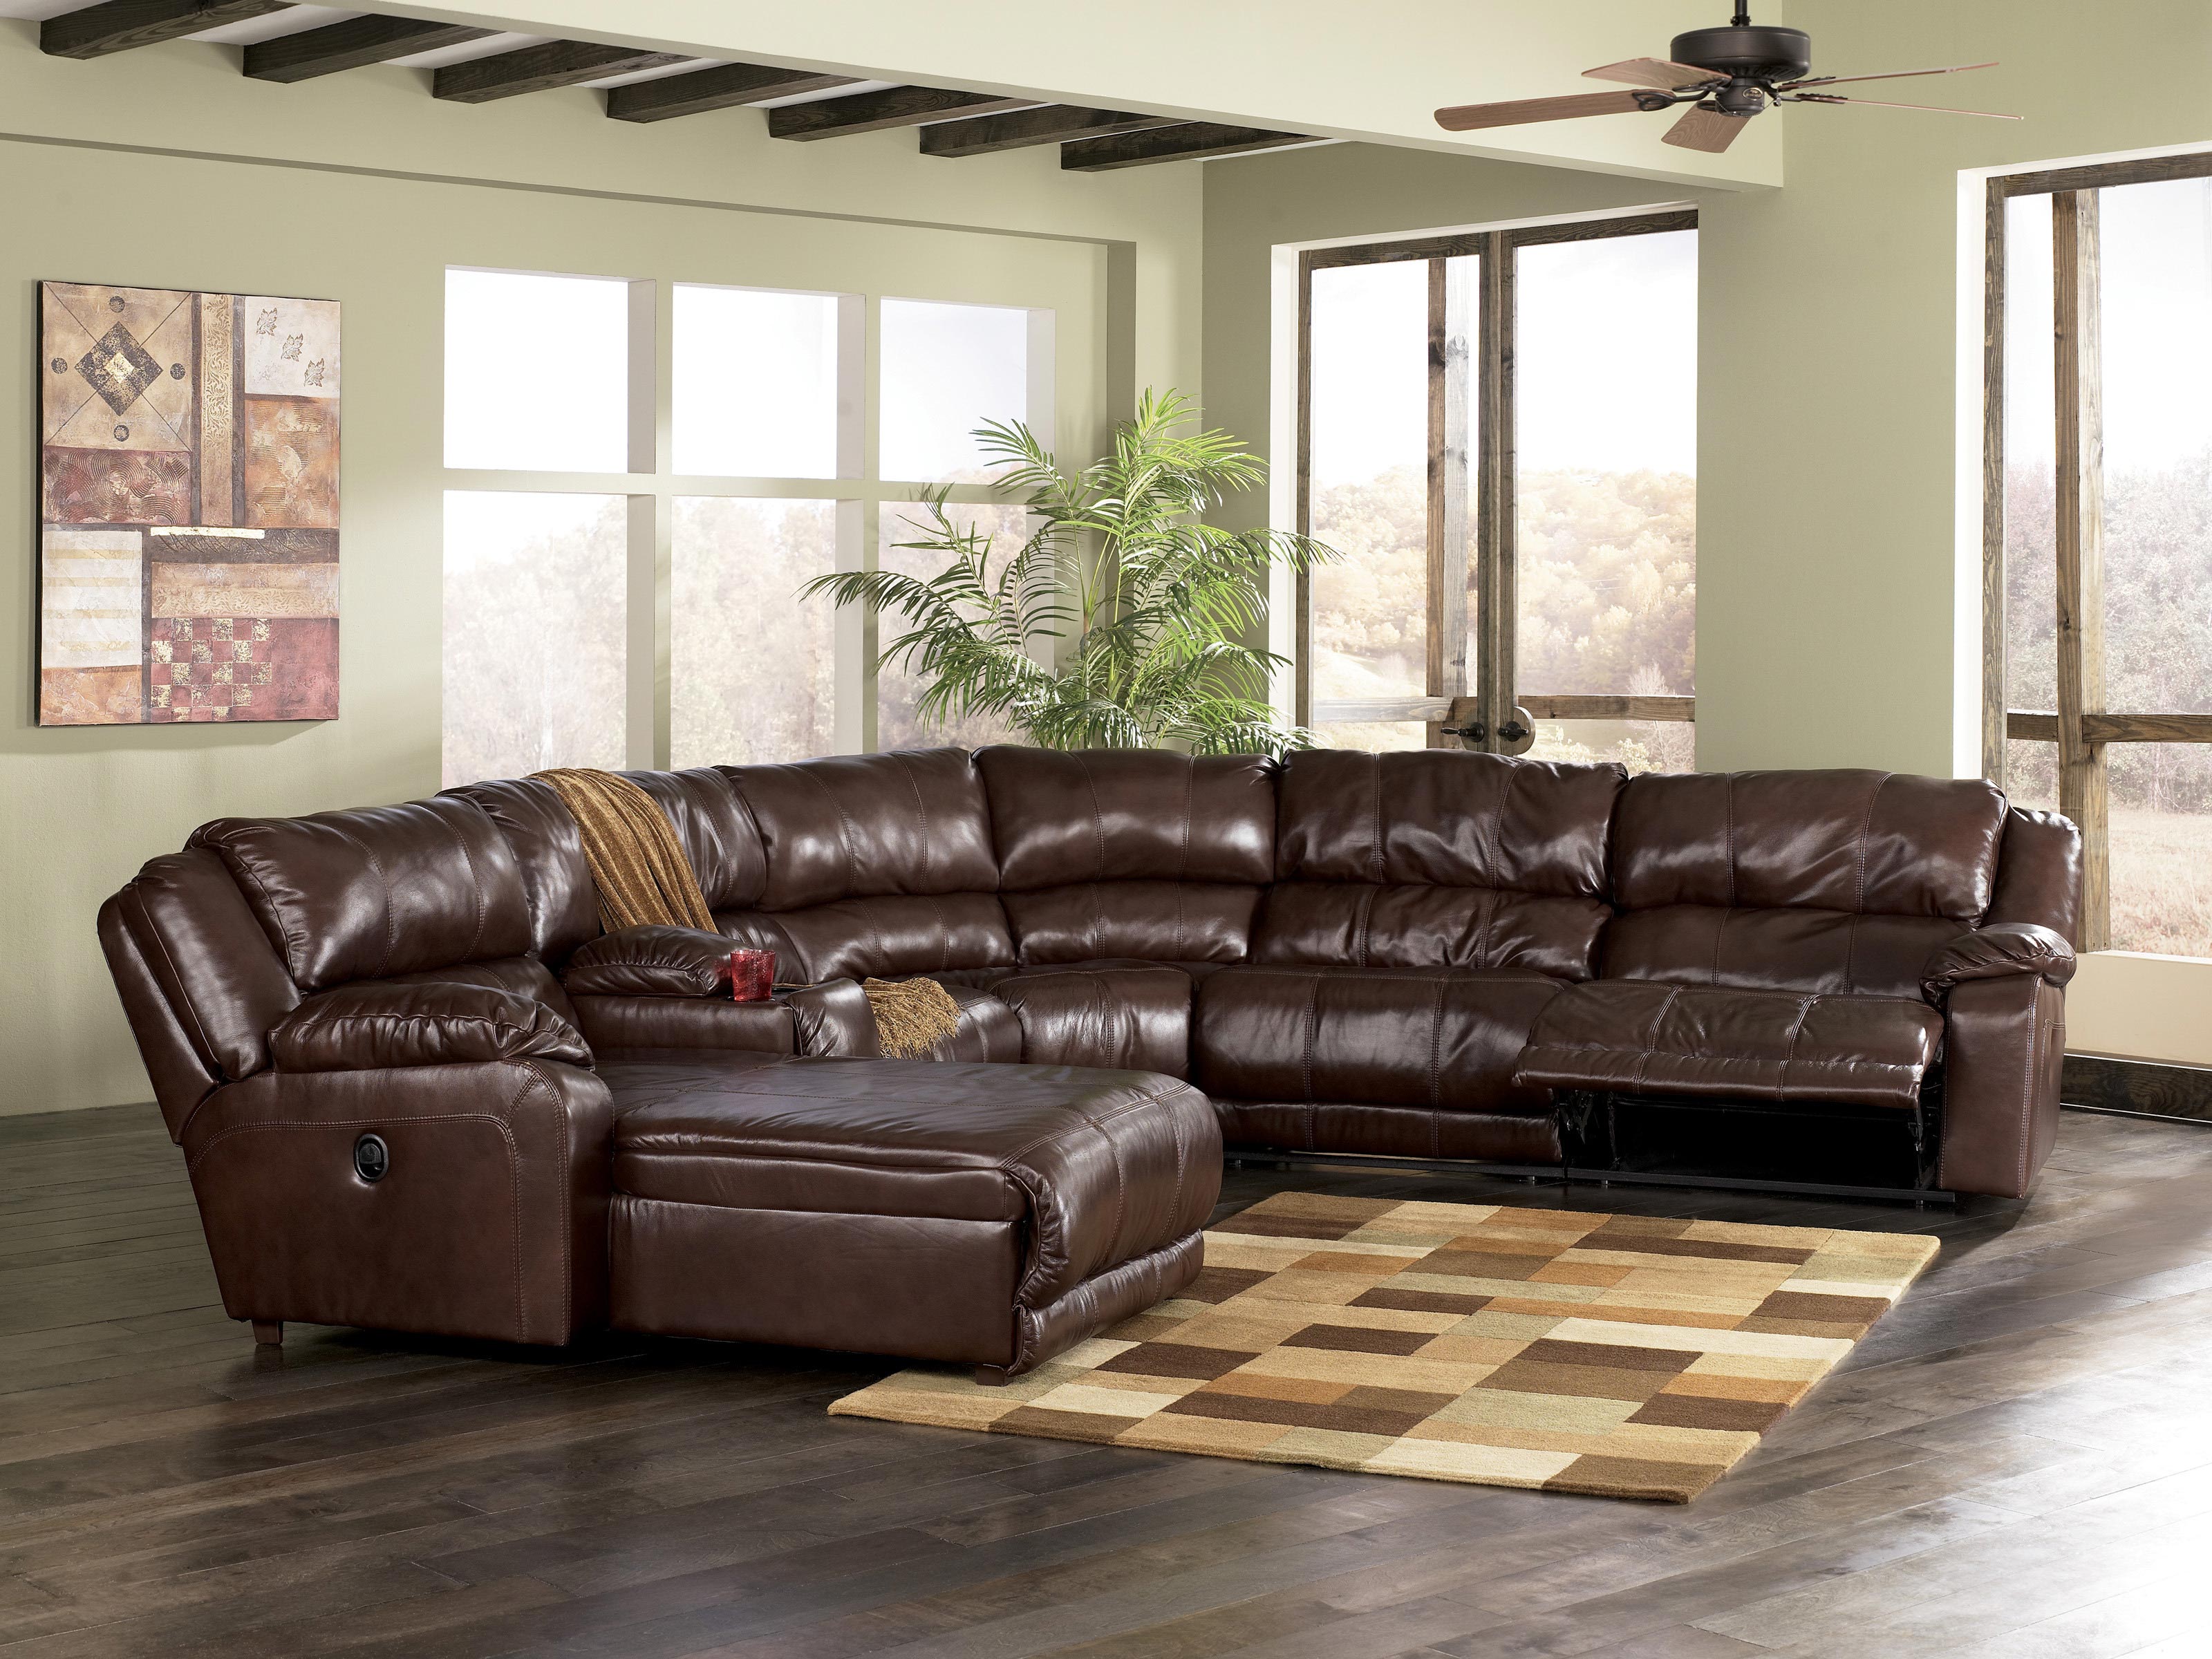 living room designs with leather sofas